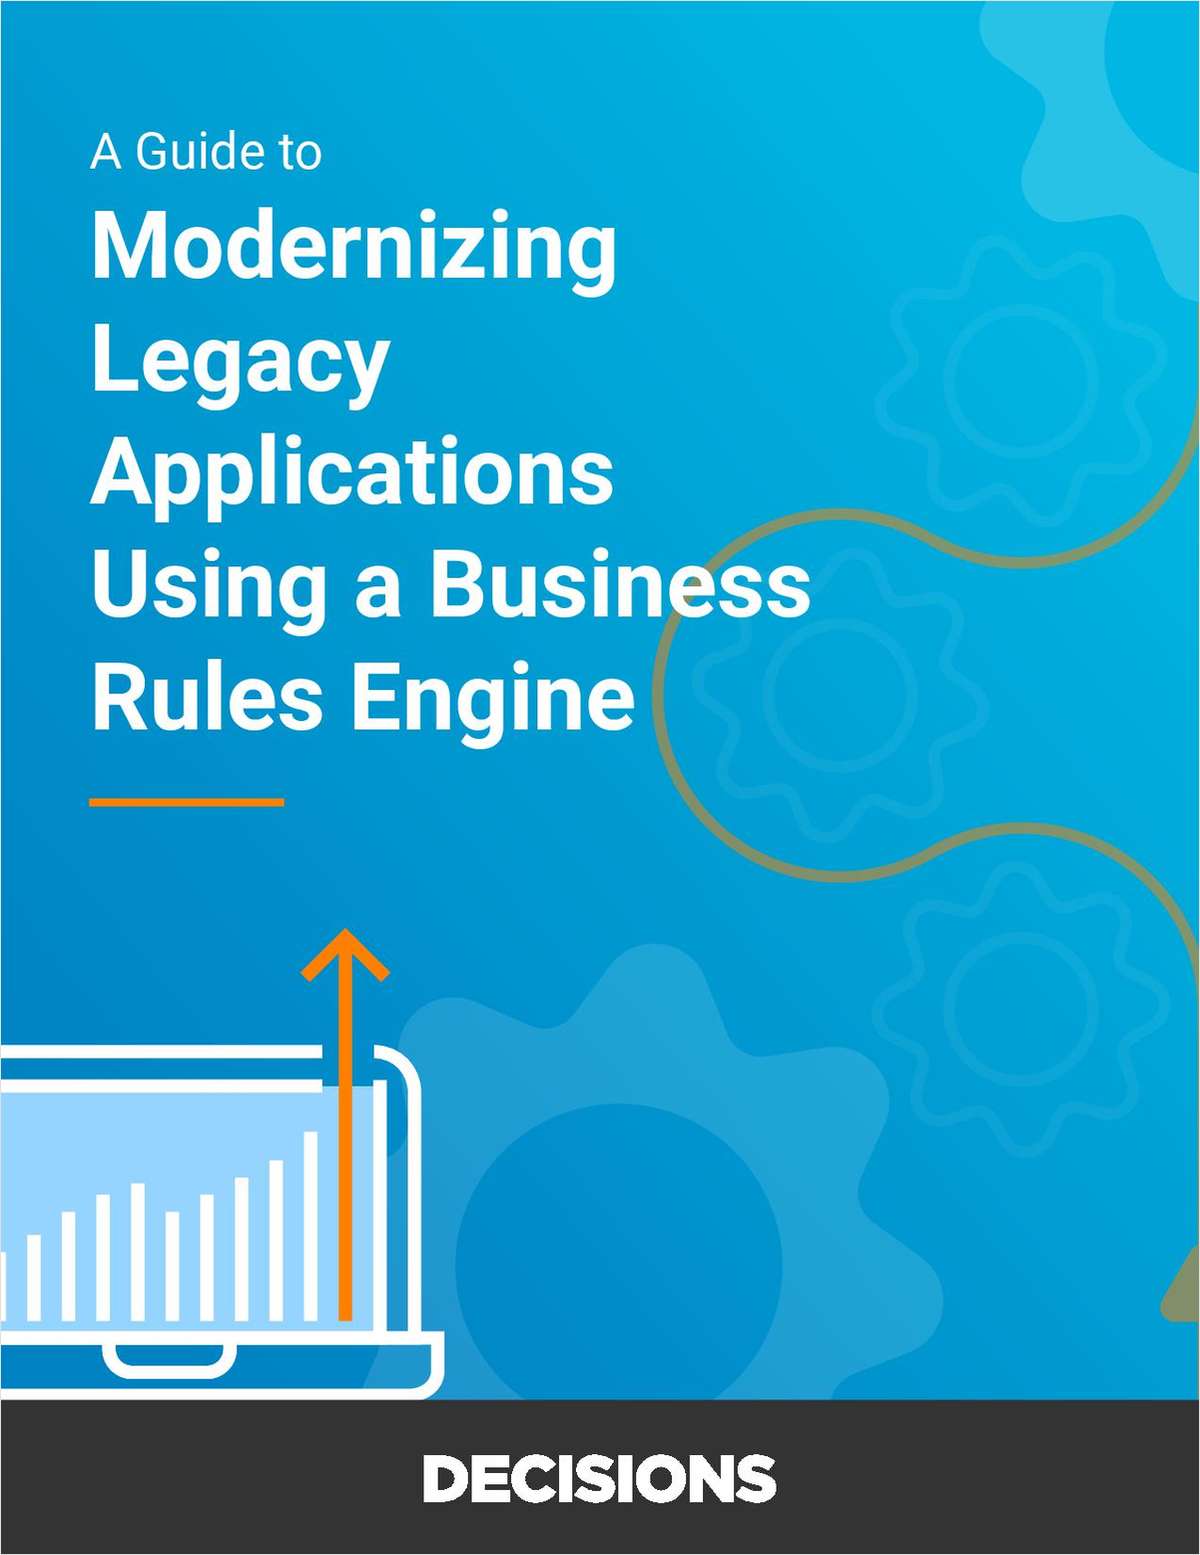 Modernizing Legacy Applications Using a Business Rules Engine